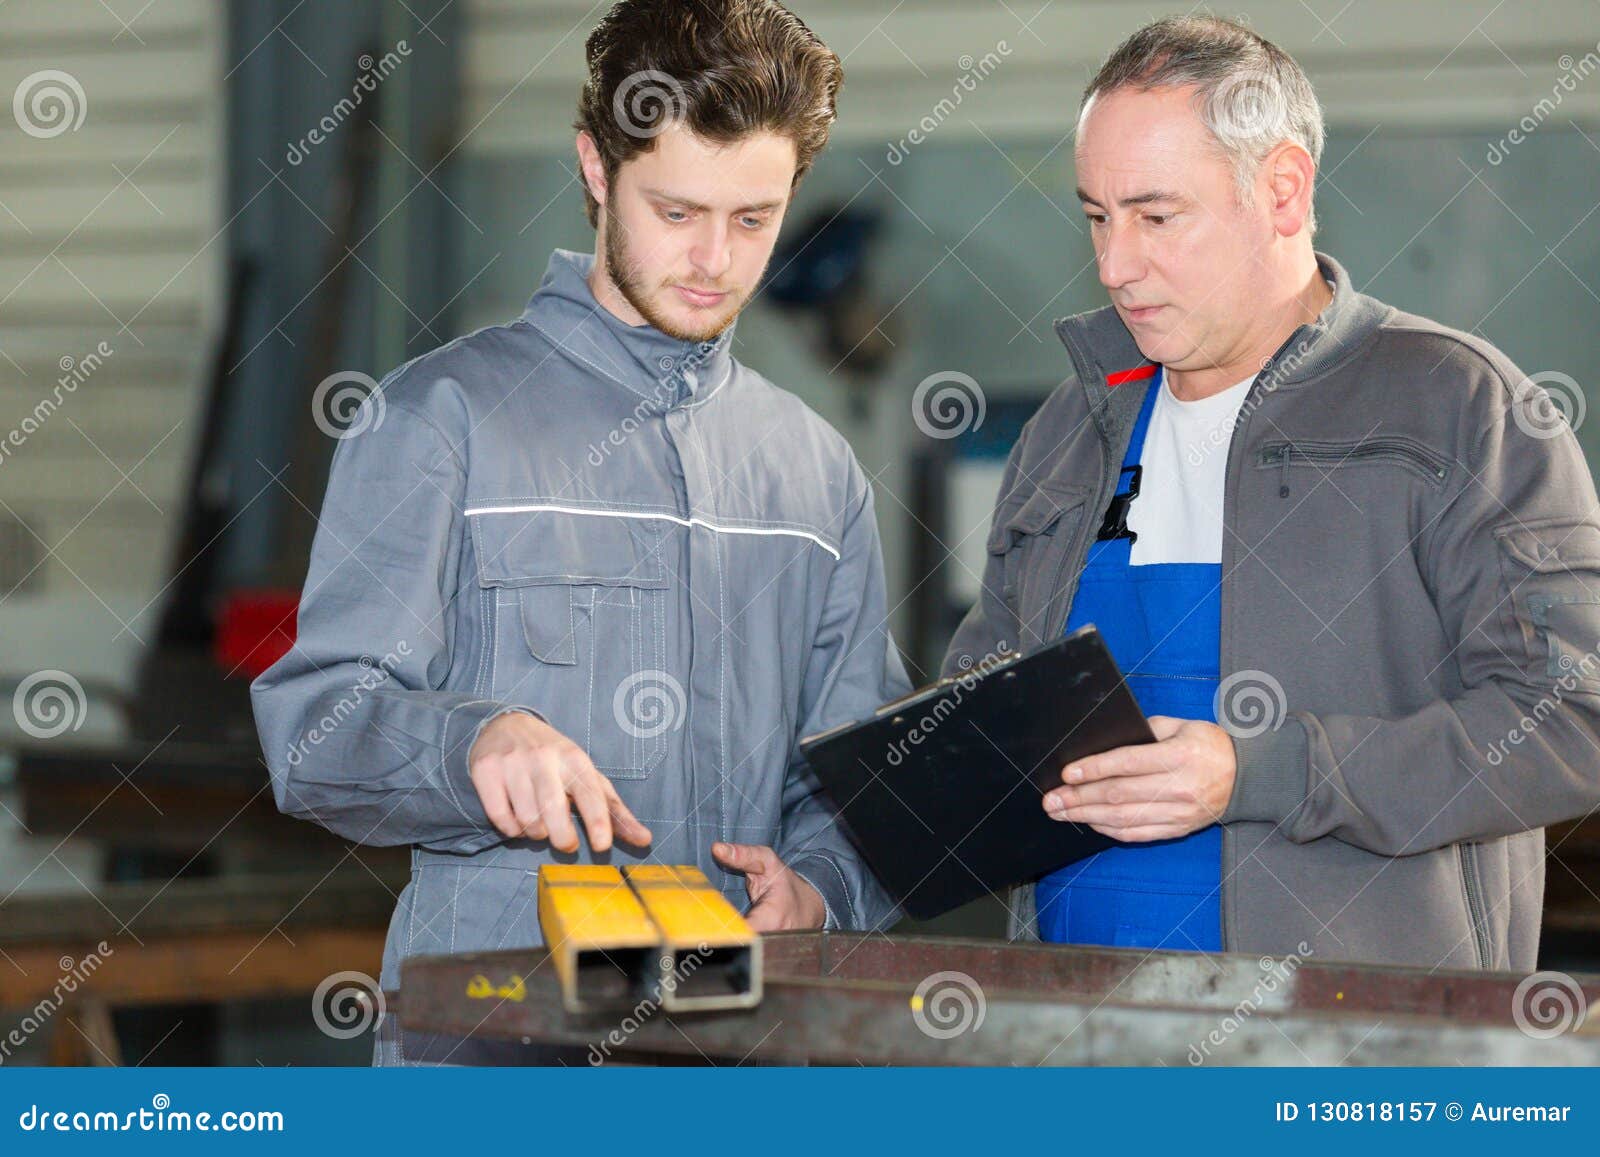 apprentice-being-shown-how-to-cut-sheet-metal-stock-image-image-of-control-industrial-130818157